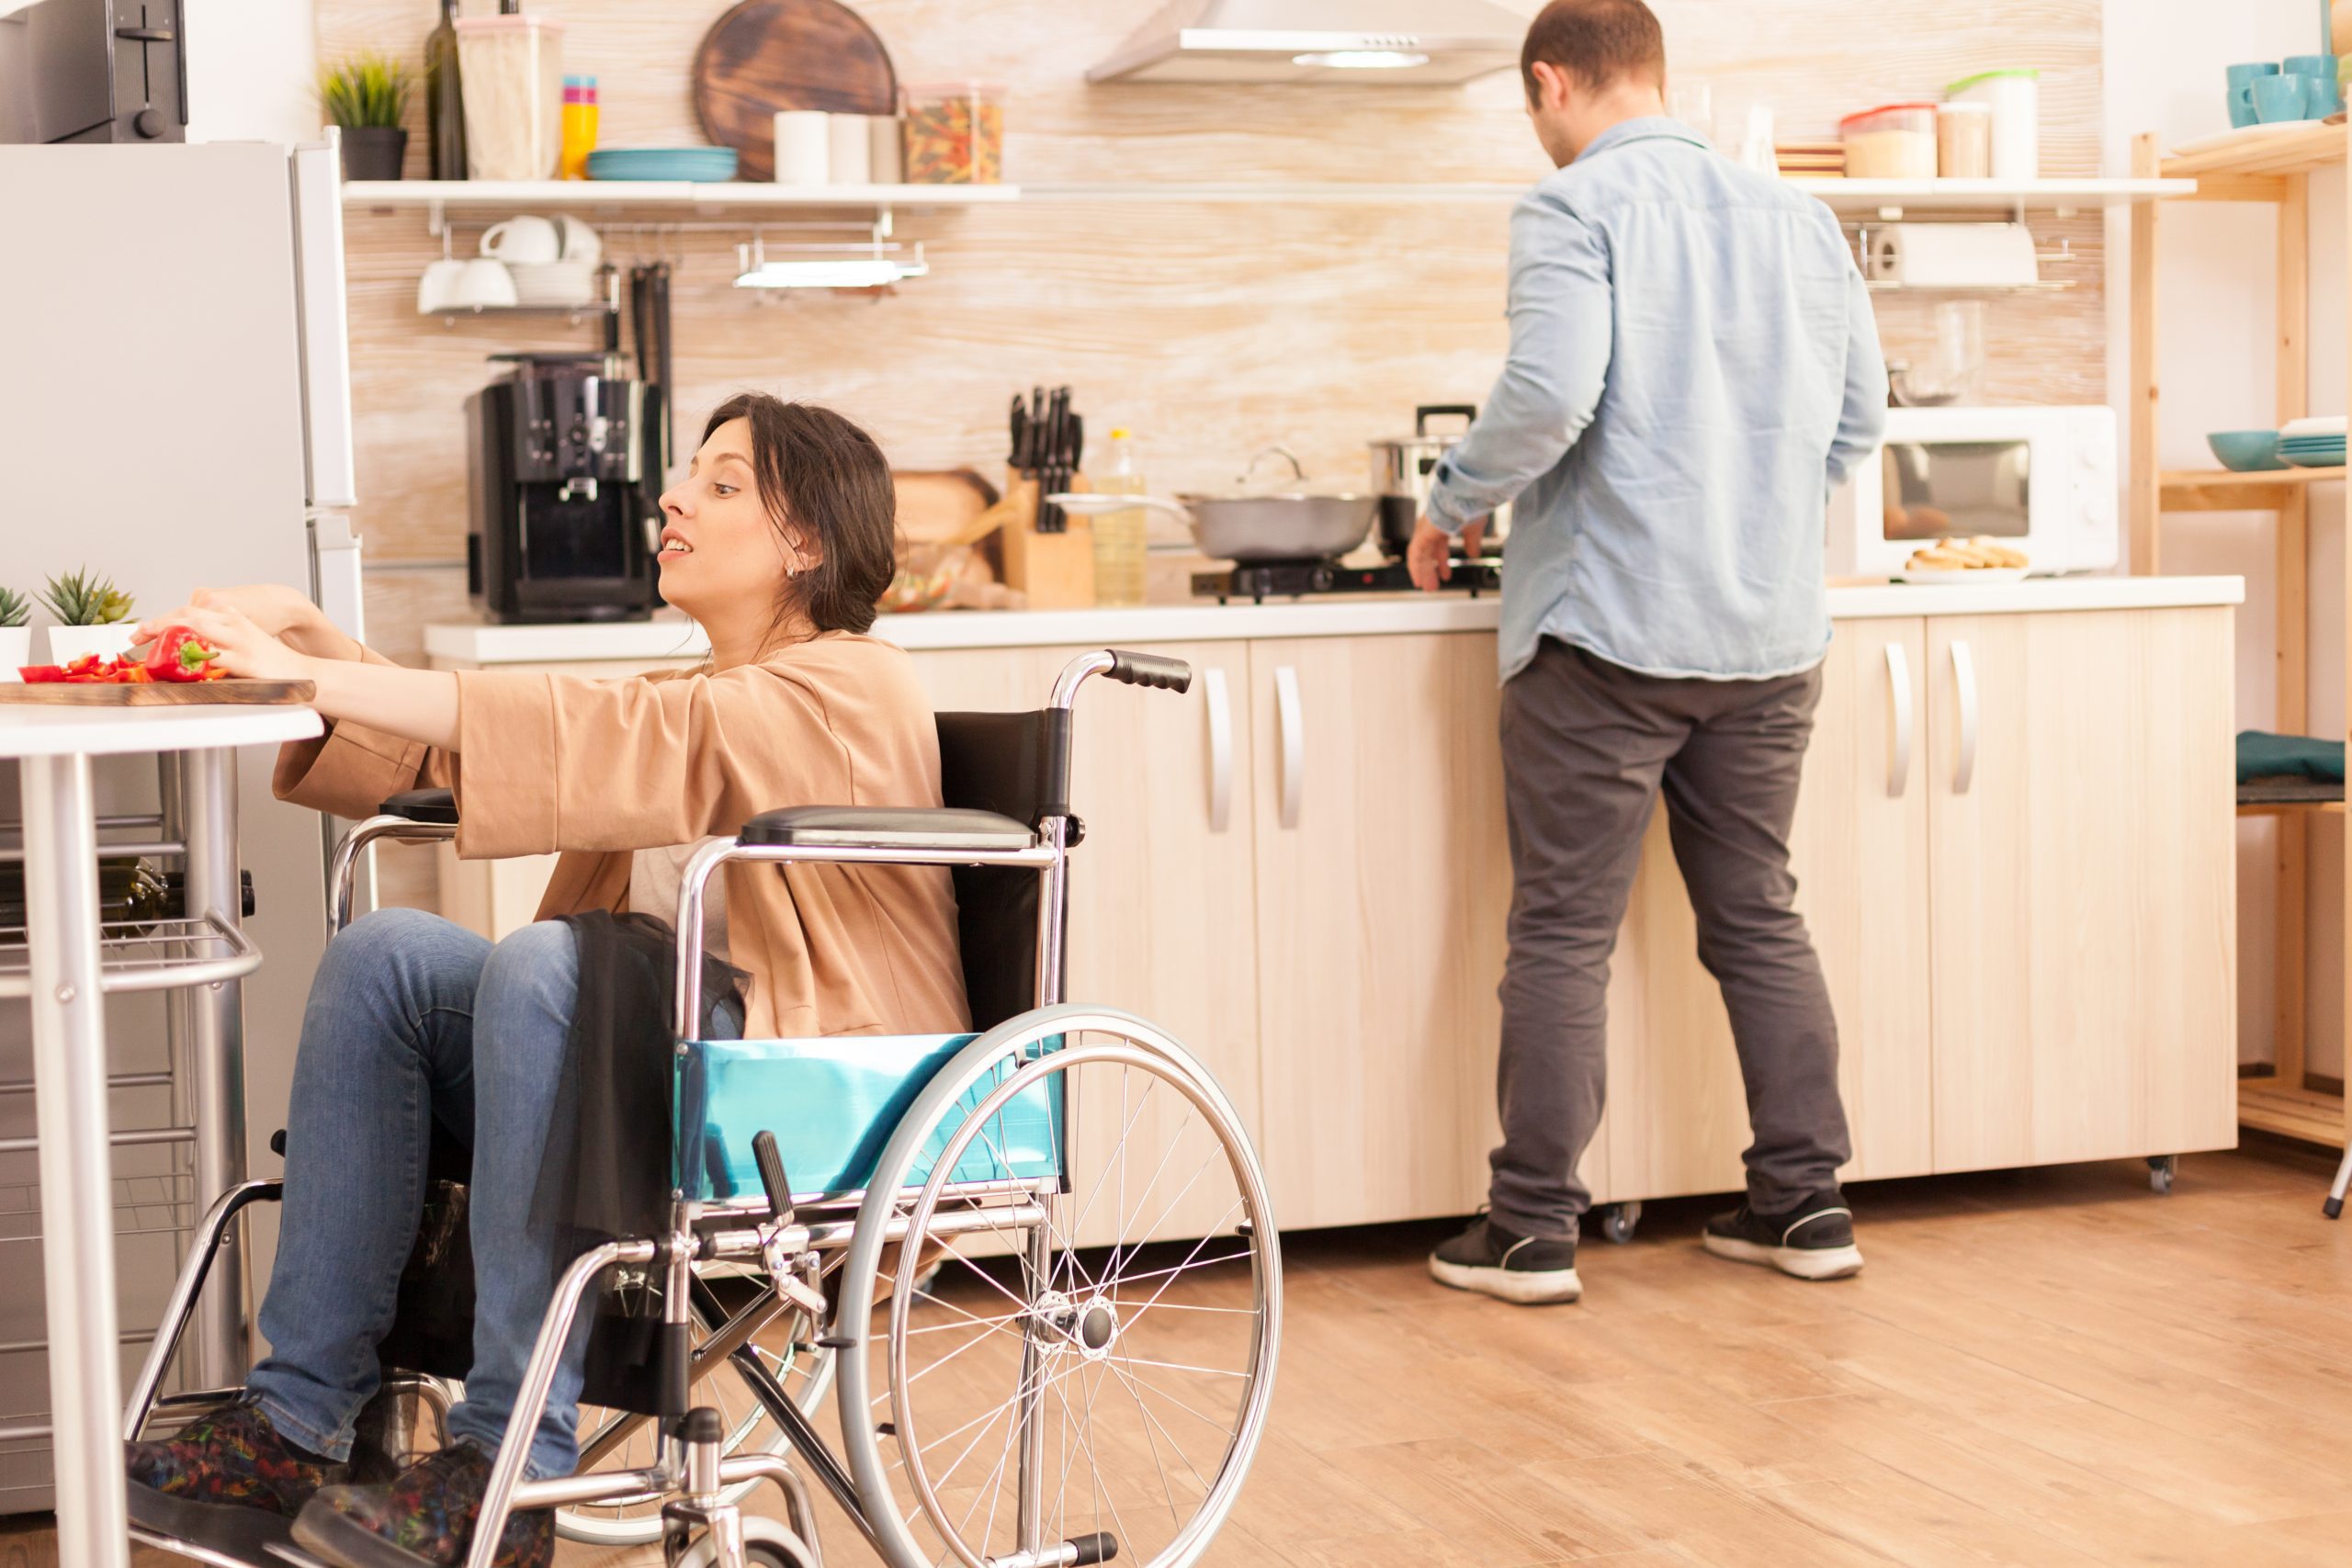 Woman in wheelchair prepares food with man also cooking in the background